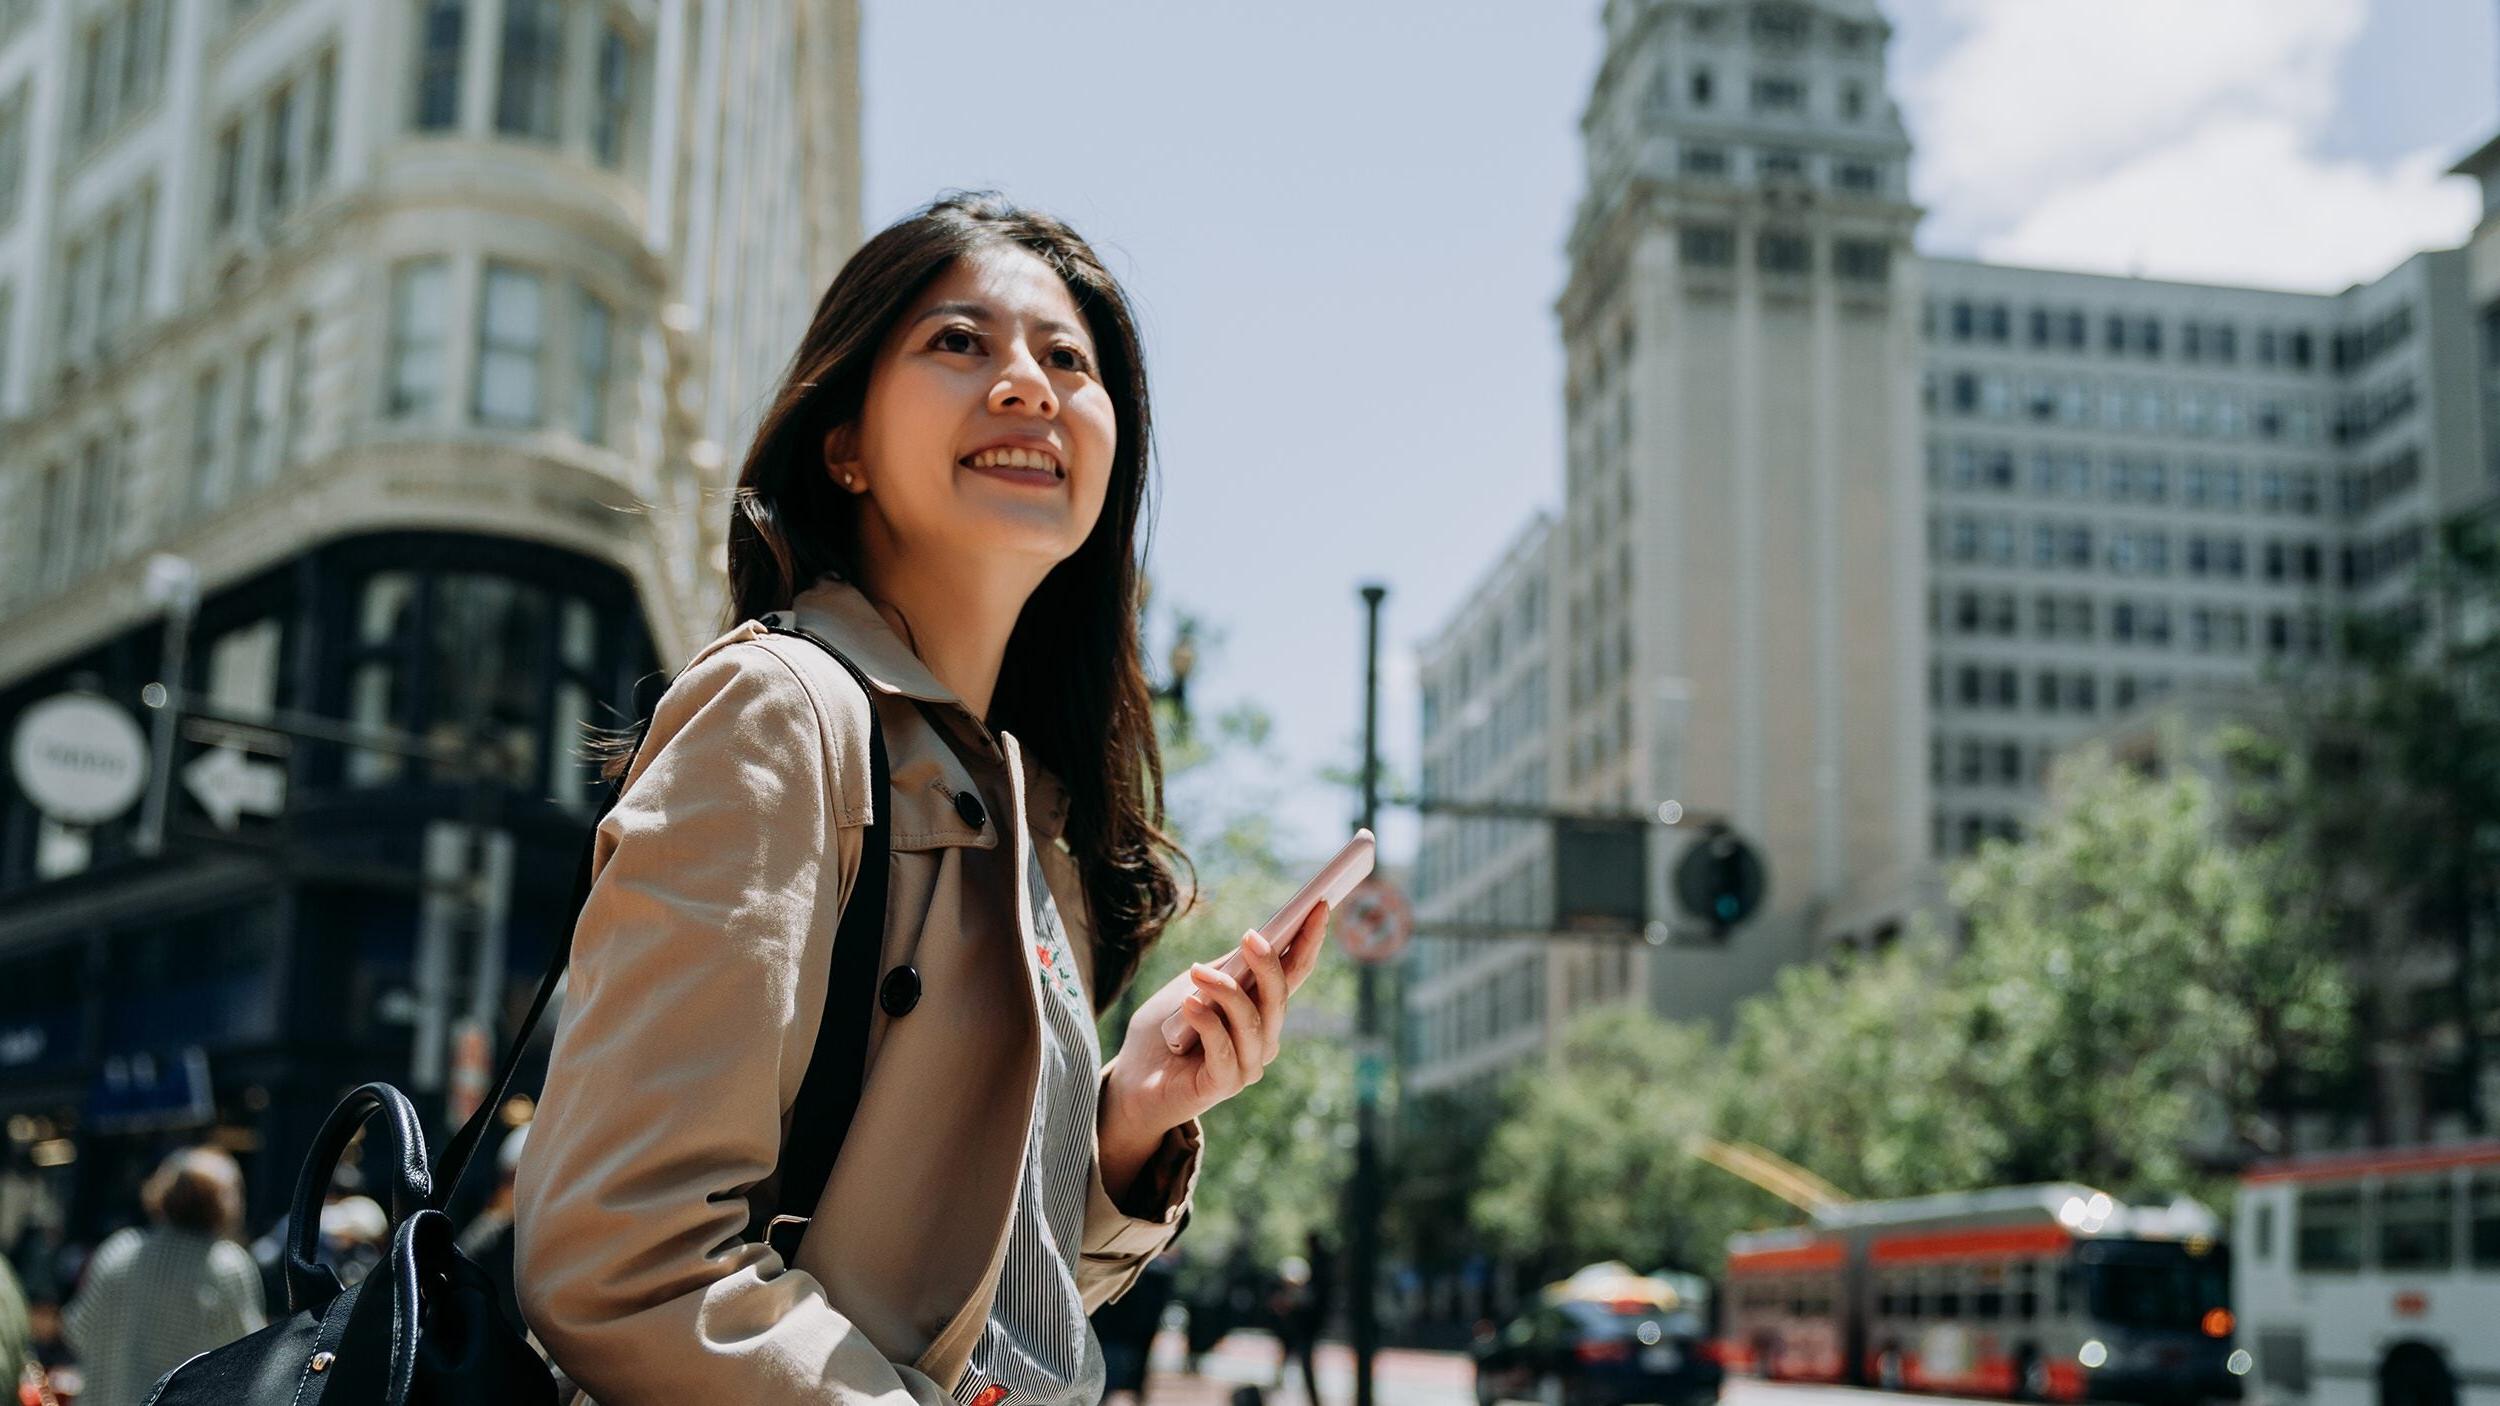 Happy woman holding phone in busy city area in San Francisco.